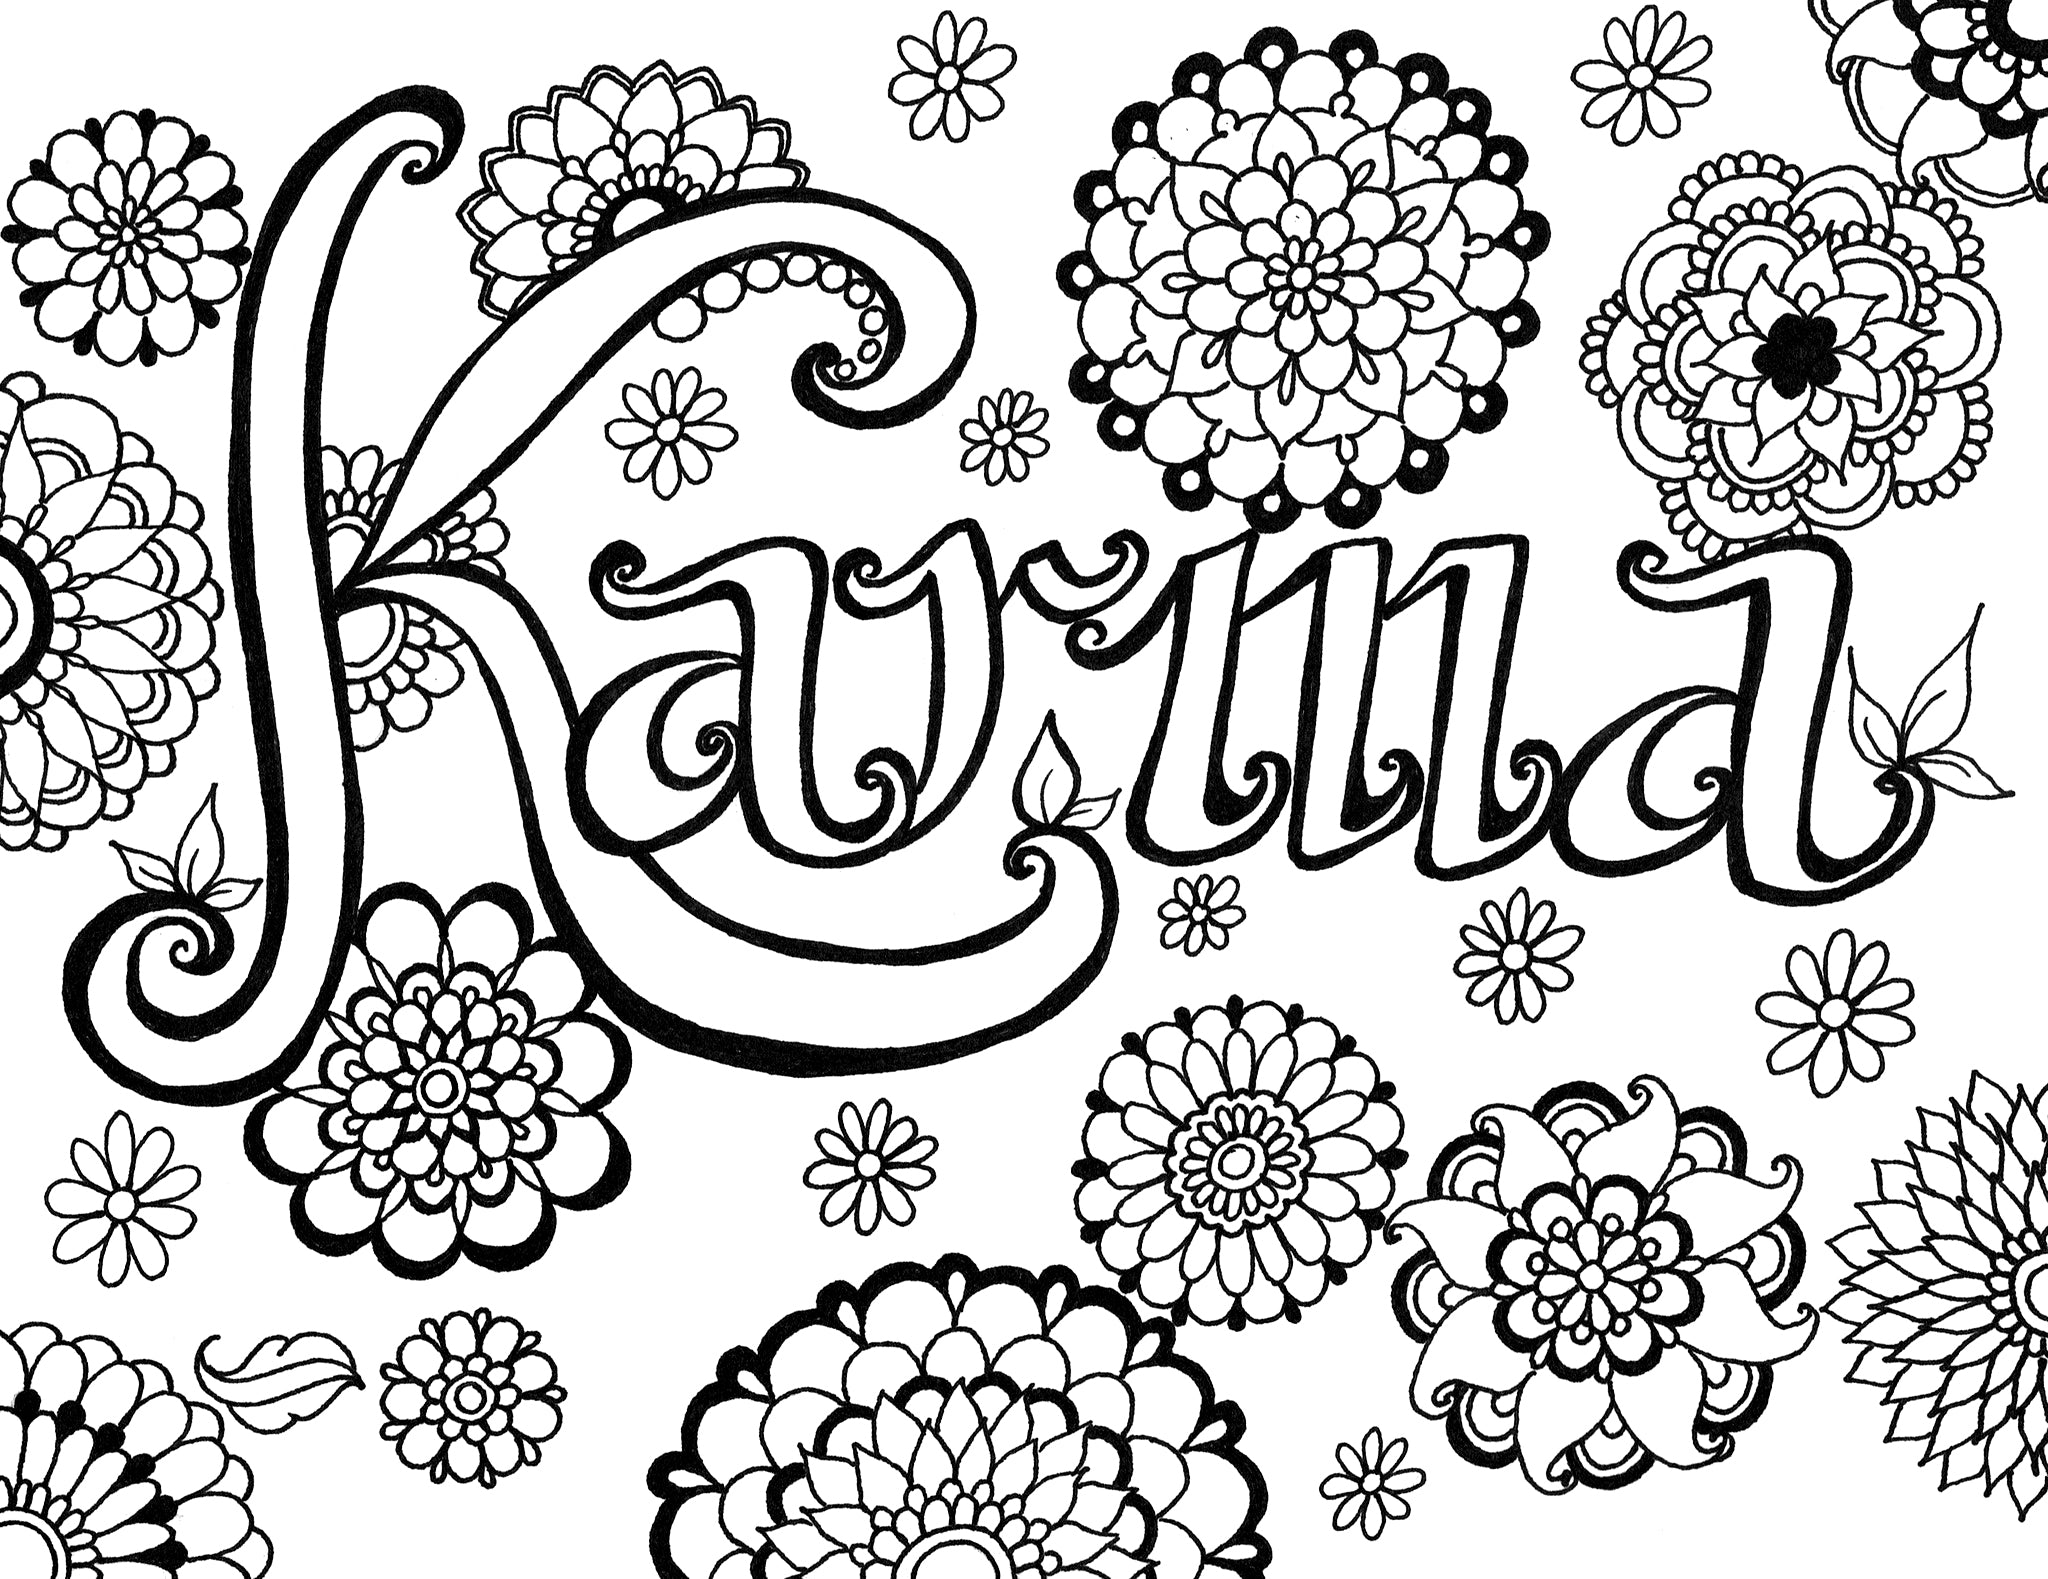 Black and white intricate floral design coloring page with the word 'Karma' elegantly scripted at the center, surrounded by a variety of detailed flowers and petals. The image symbolizes the beauty and complexity of life, inviting individuals to engage in positive actions and reminding them of the cycle of cause and effect, where our deeds inevitably return to us, just like the patterns that return and complete the design in this artwork. Free coloring page :: YouColor